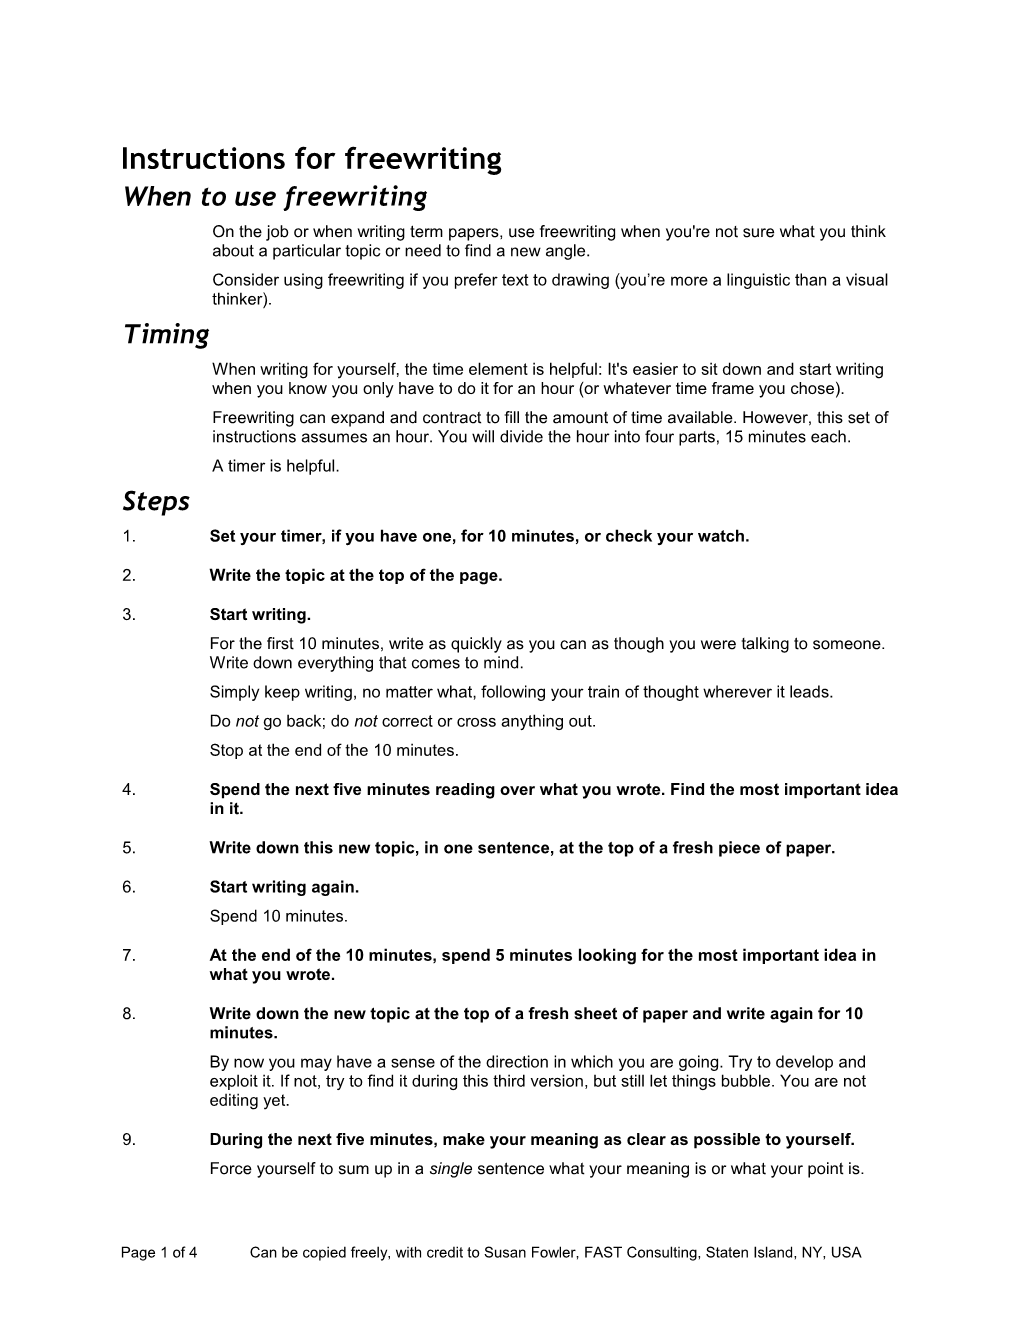 Instructions for Freewriting